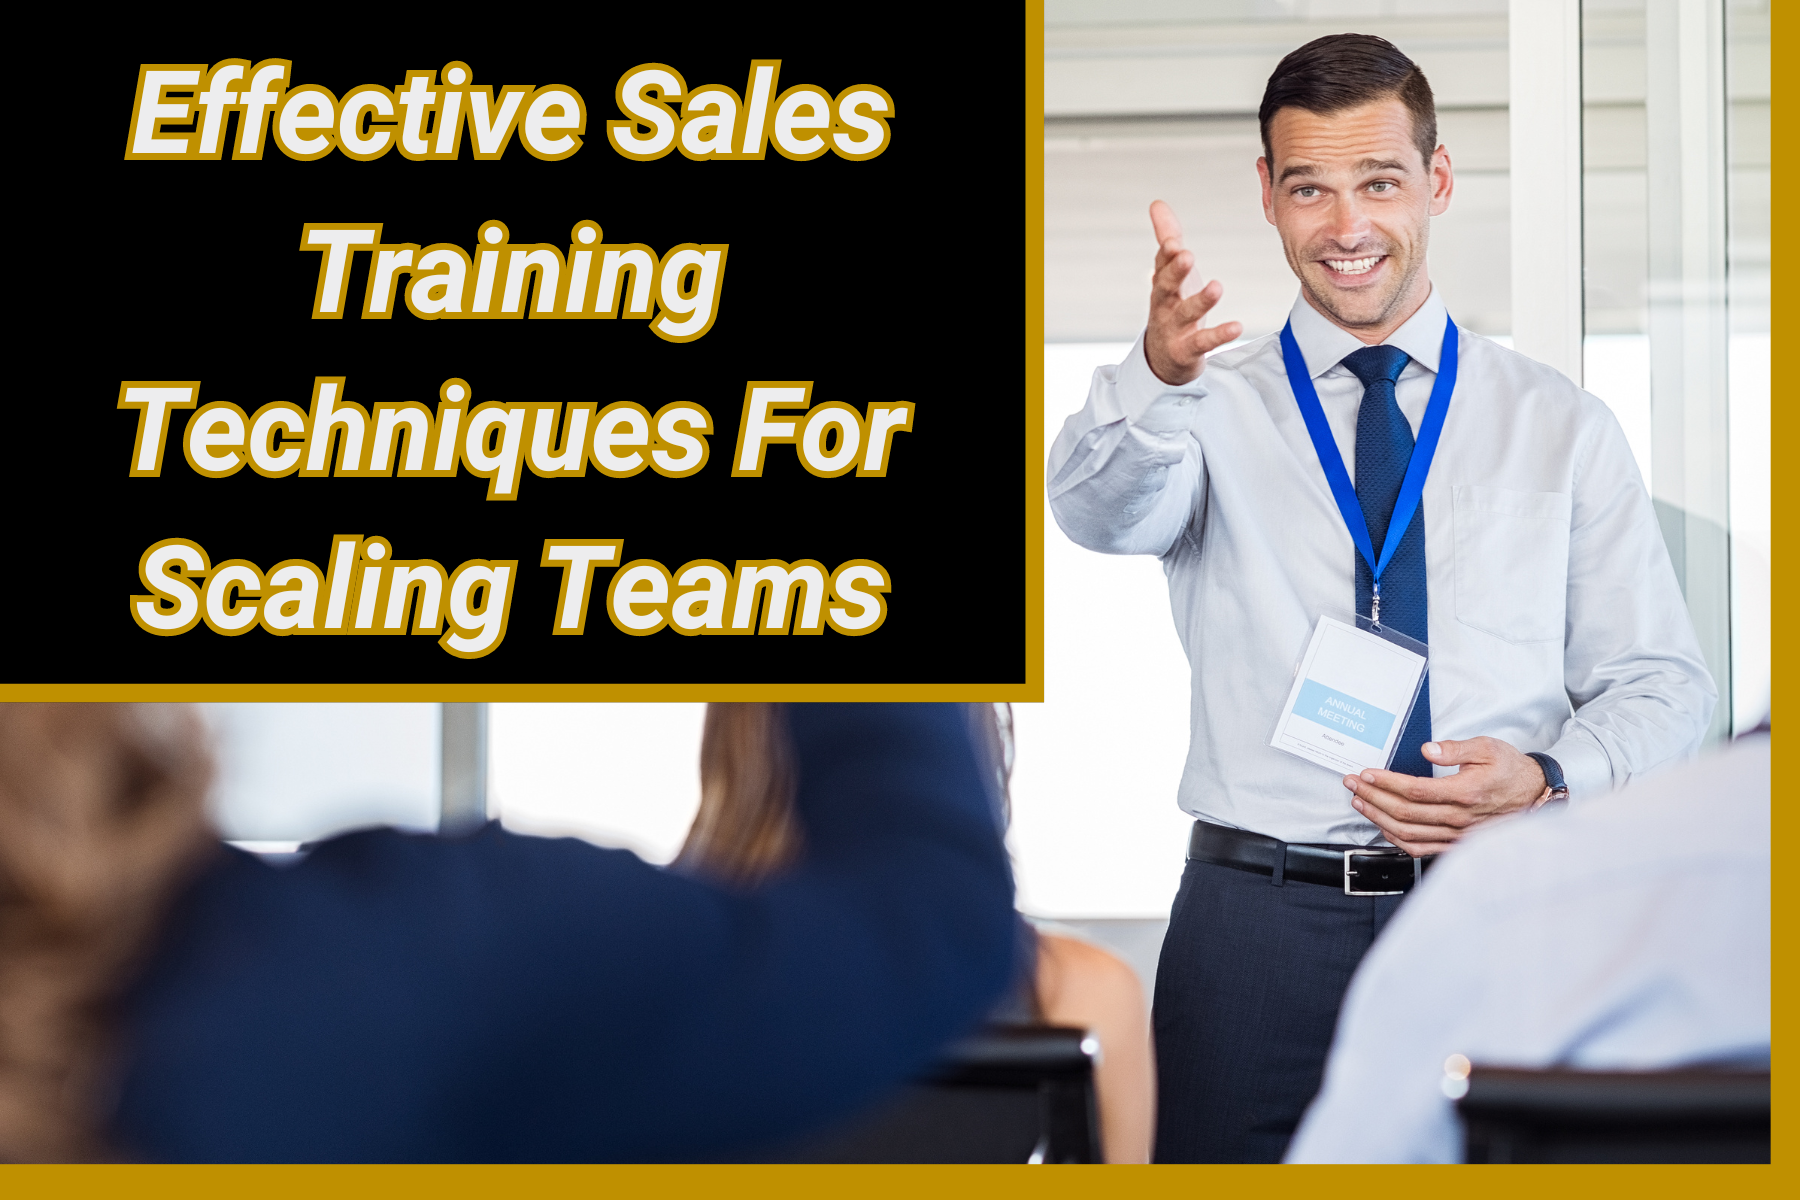 Effective Sales Training Techniques For Scaling Teams